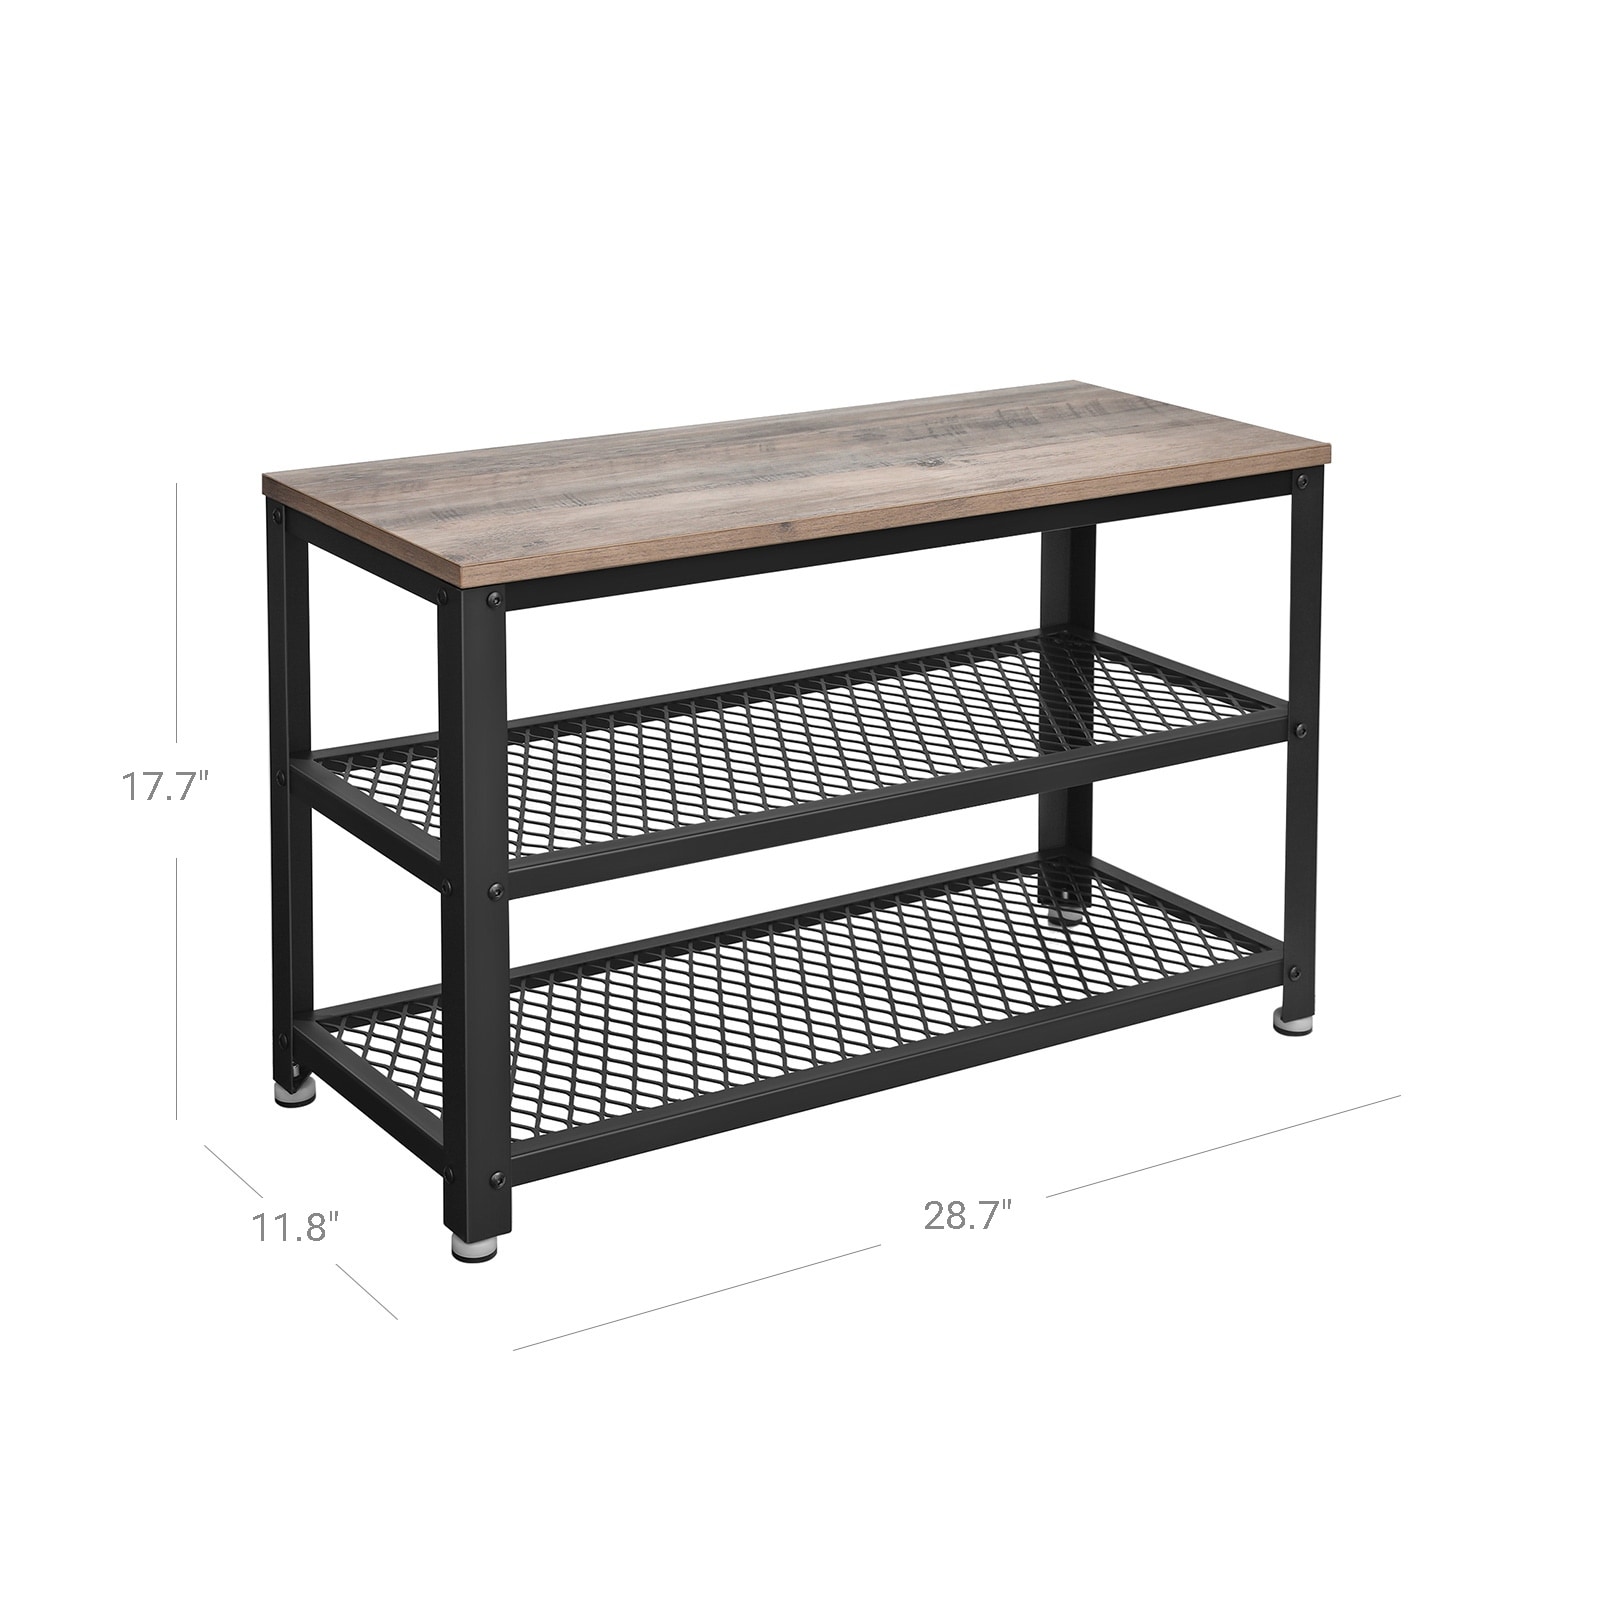 https://ak1.ostkcdn.com/images/products/is/images/direct/0c5be7d3b4d169c6253ac09c66fc72cd08f23fb9/VASAGLE-Industrial-Shoe-Bench%2C-3-Tier-Shoe-Rack%2C-39.4-Inches-Long-Storage-Shelves%2C-for-Entryway.jpg